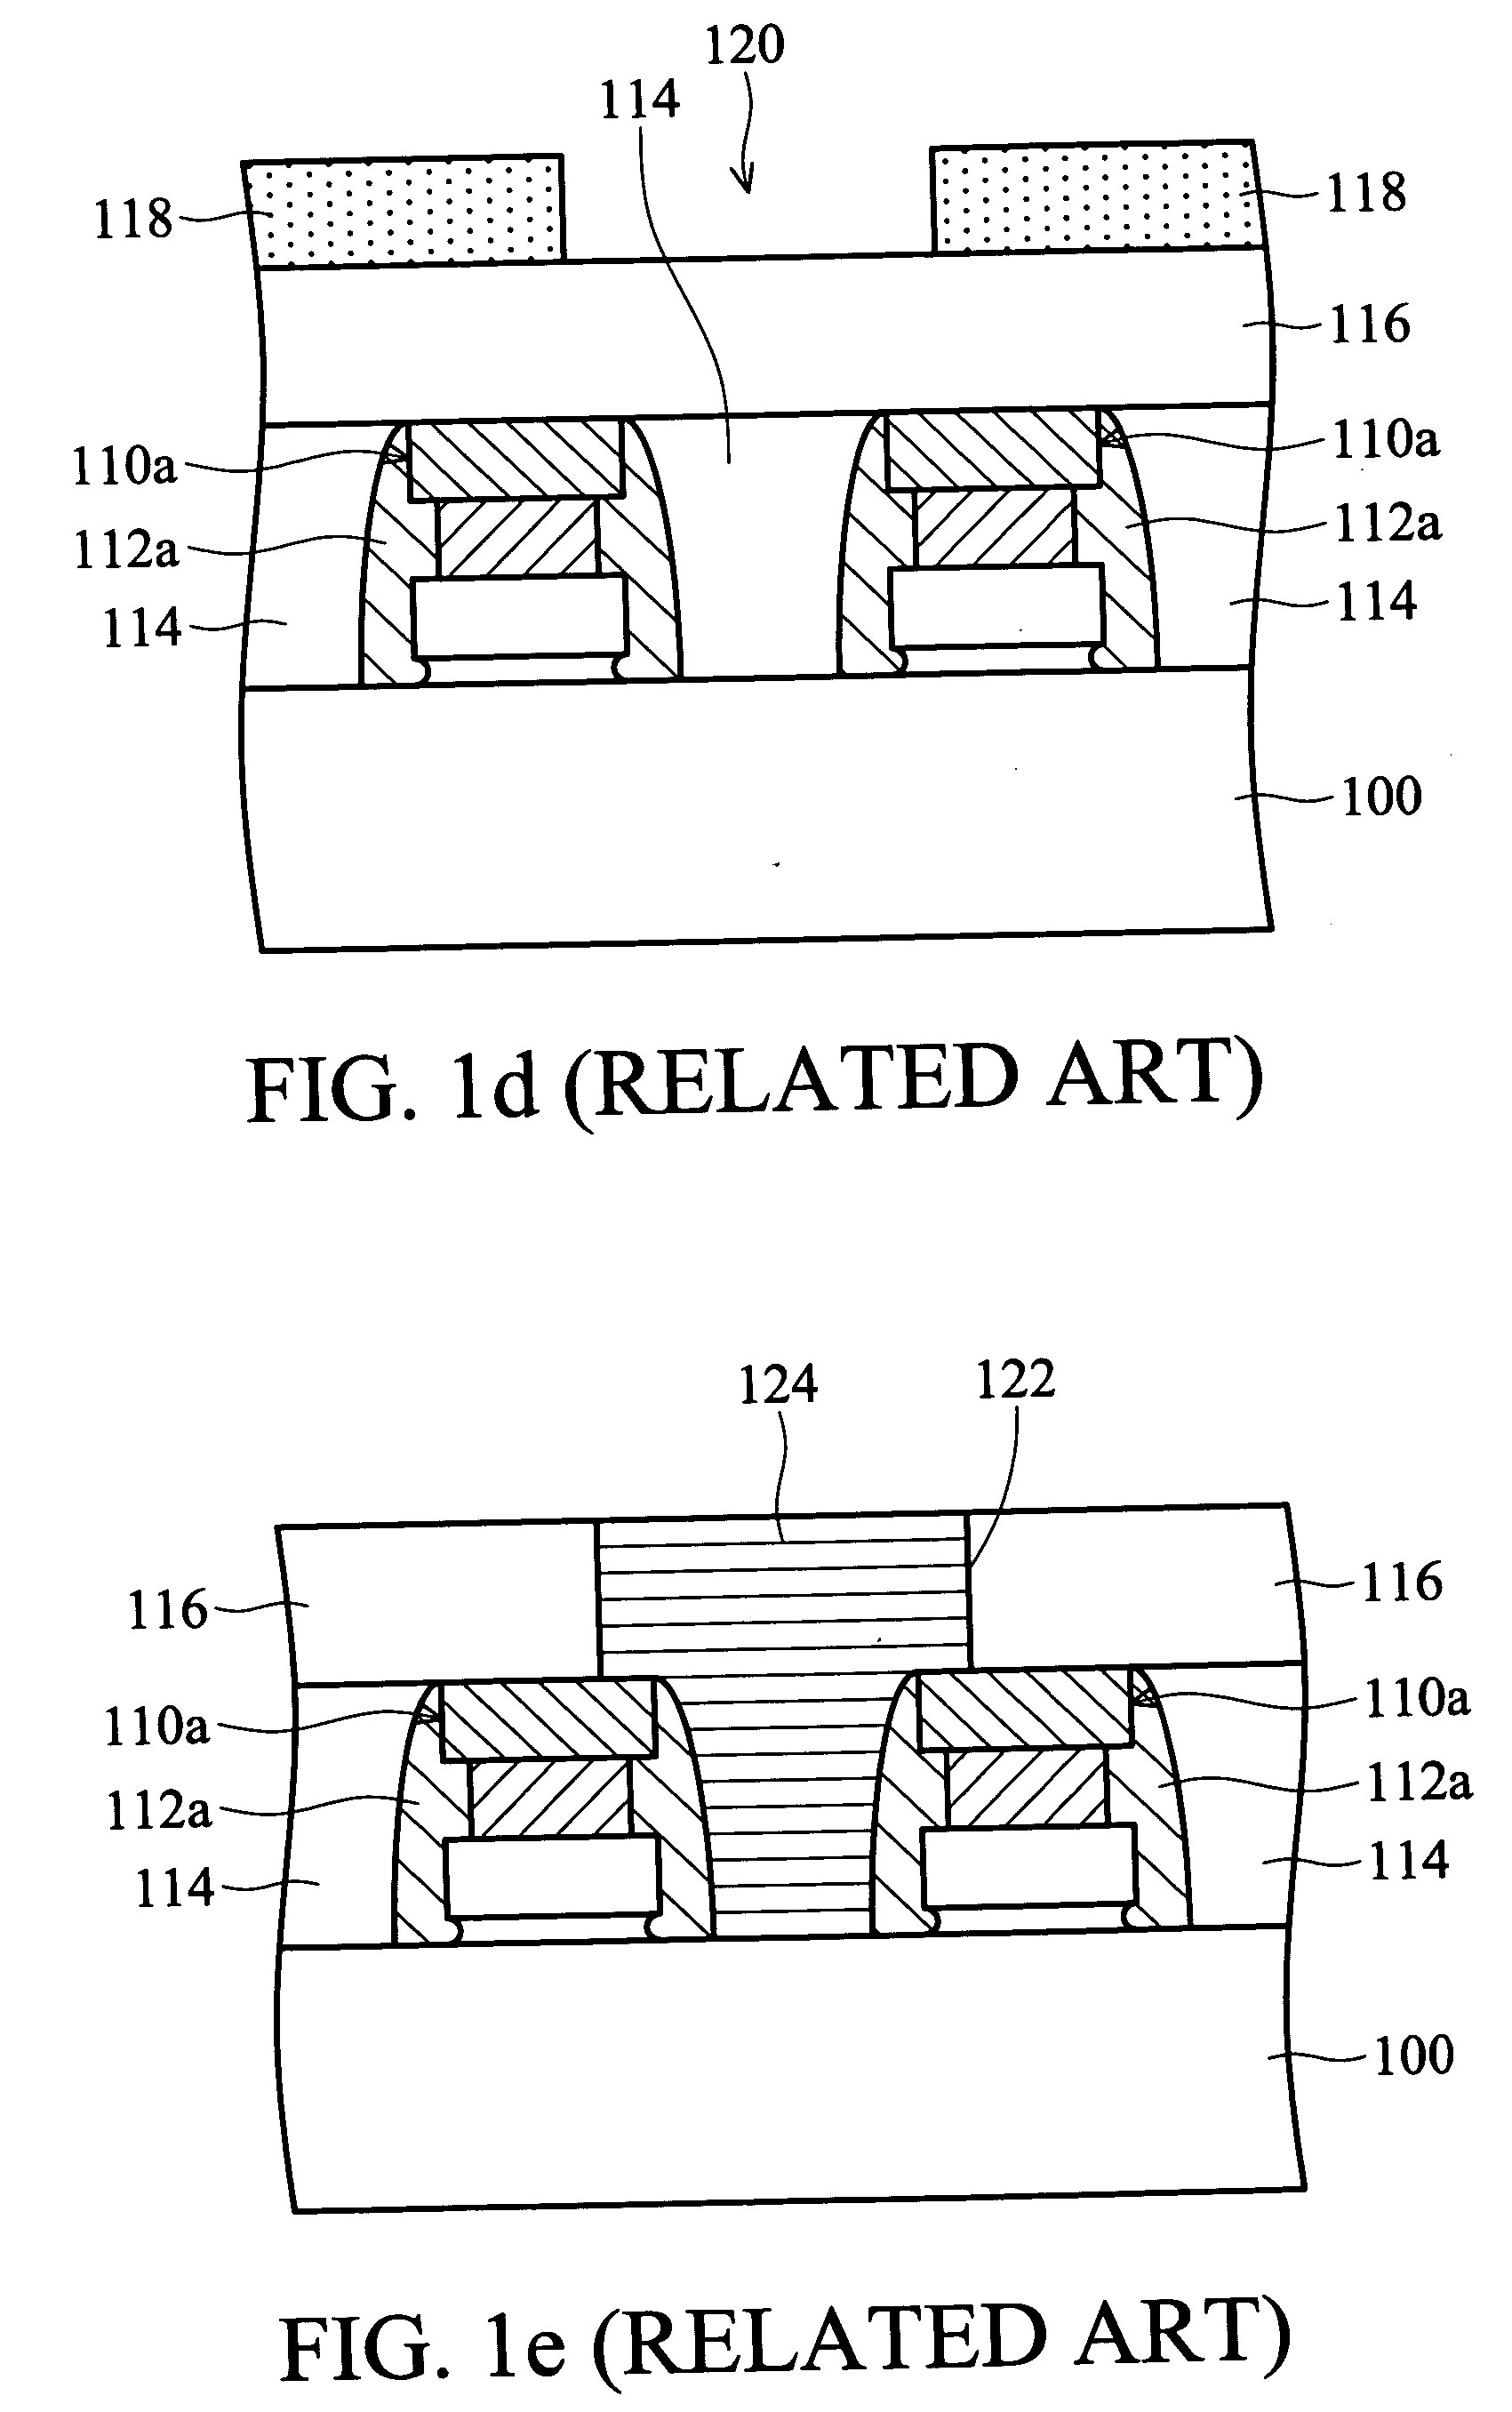 World line structure with single-sided partially recessed gate structure